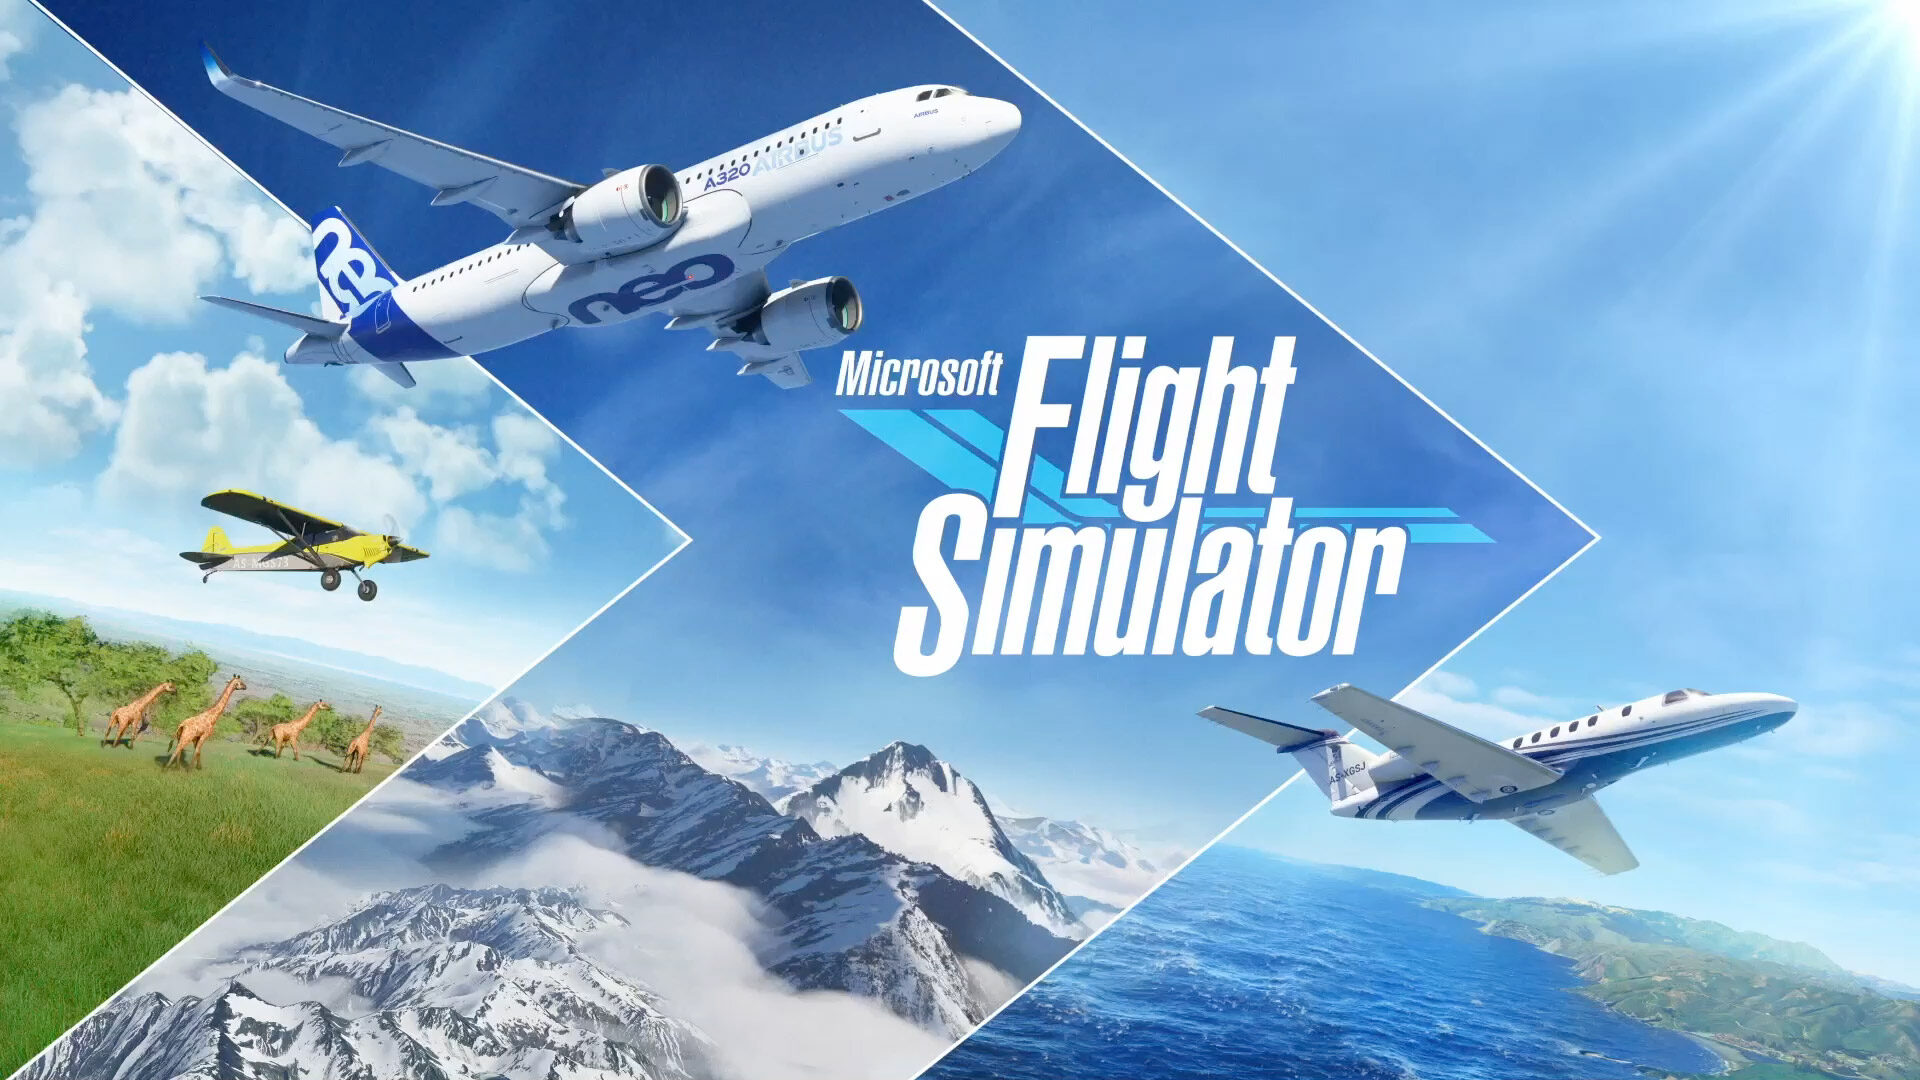 x plane simulator android download